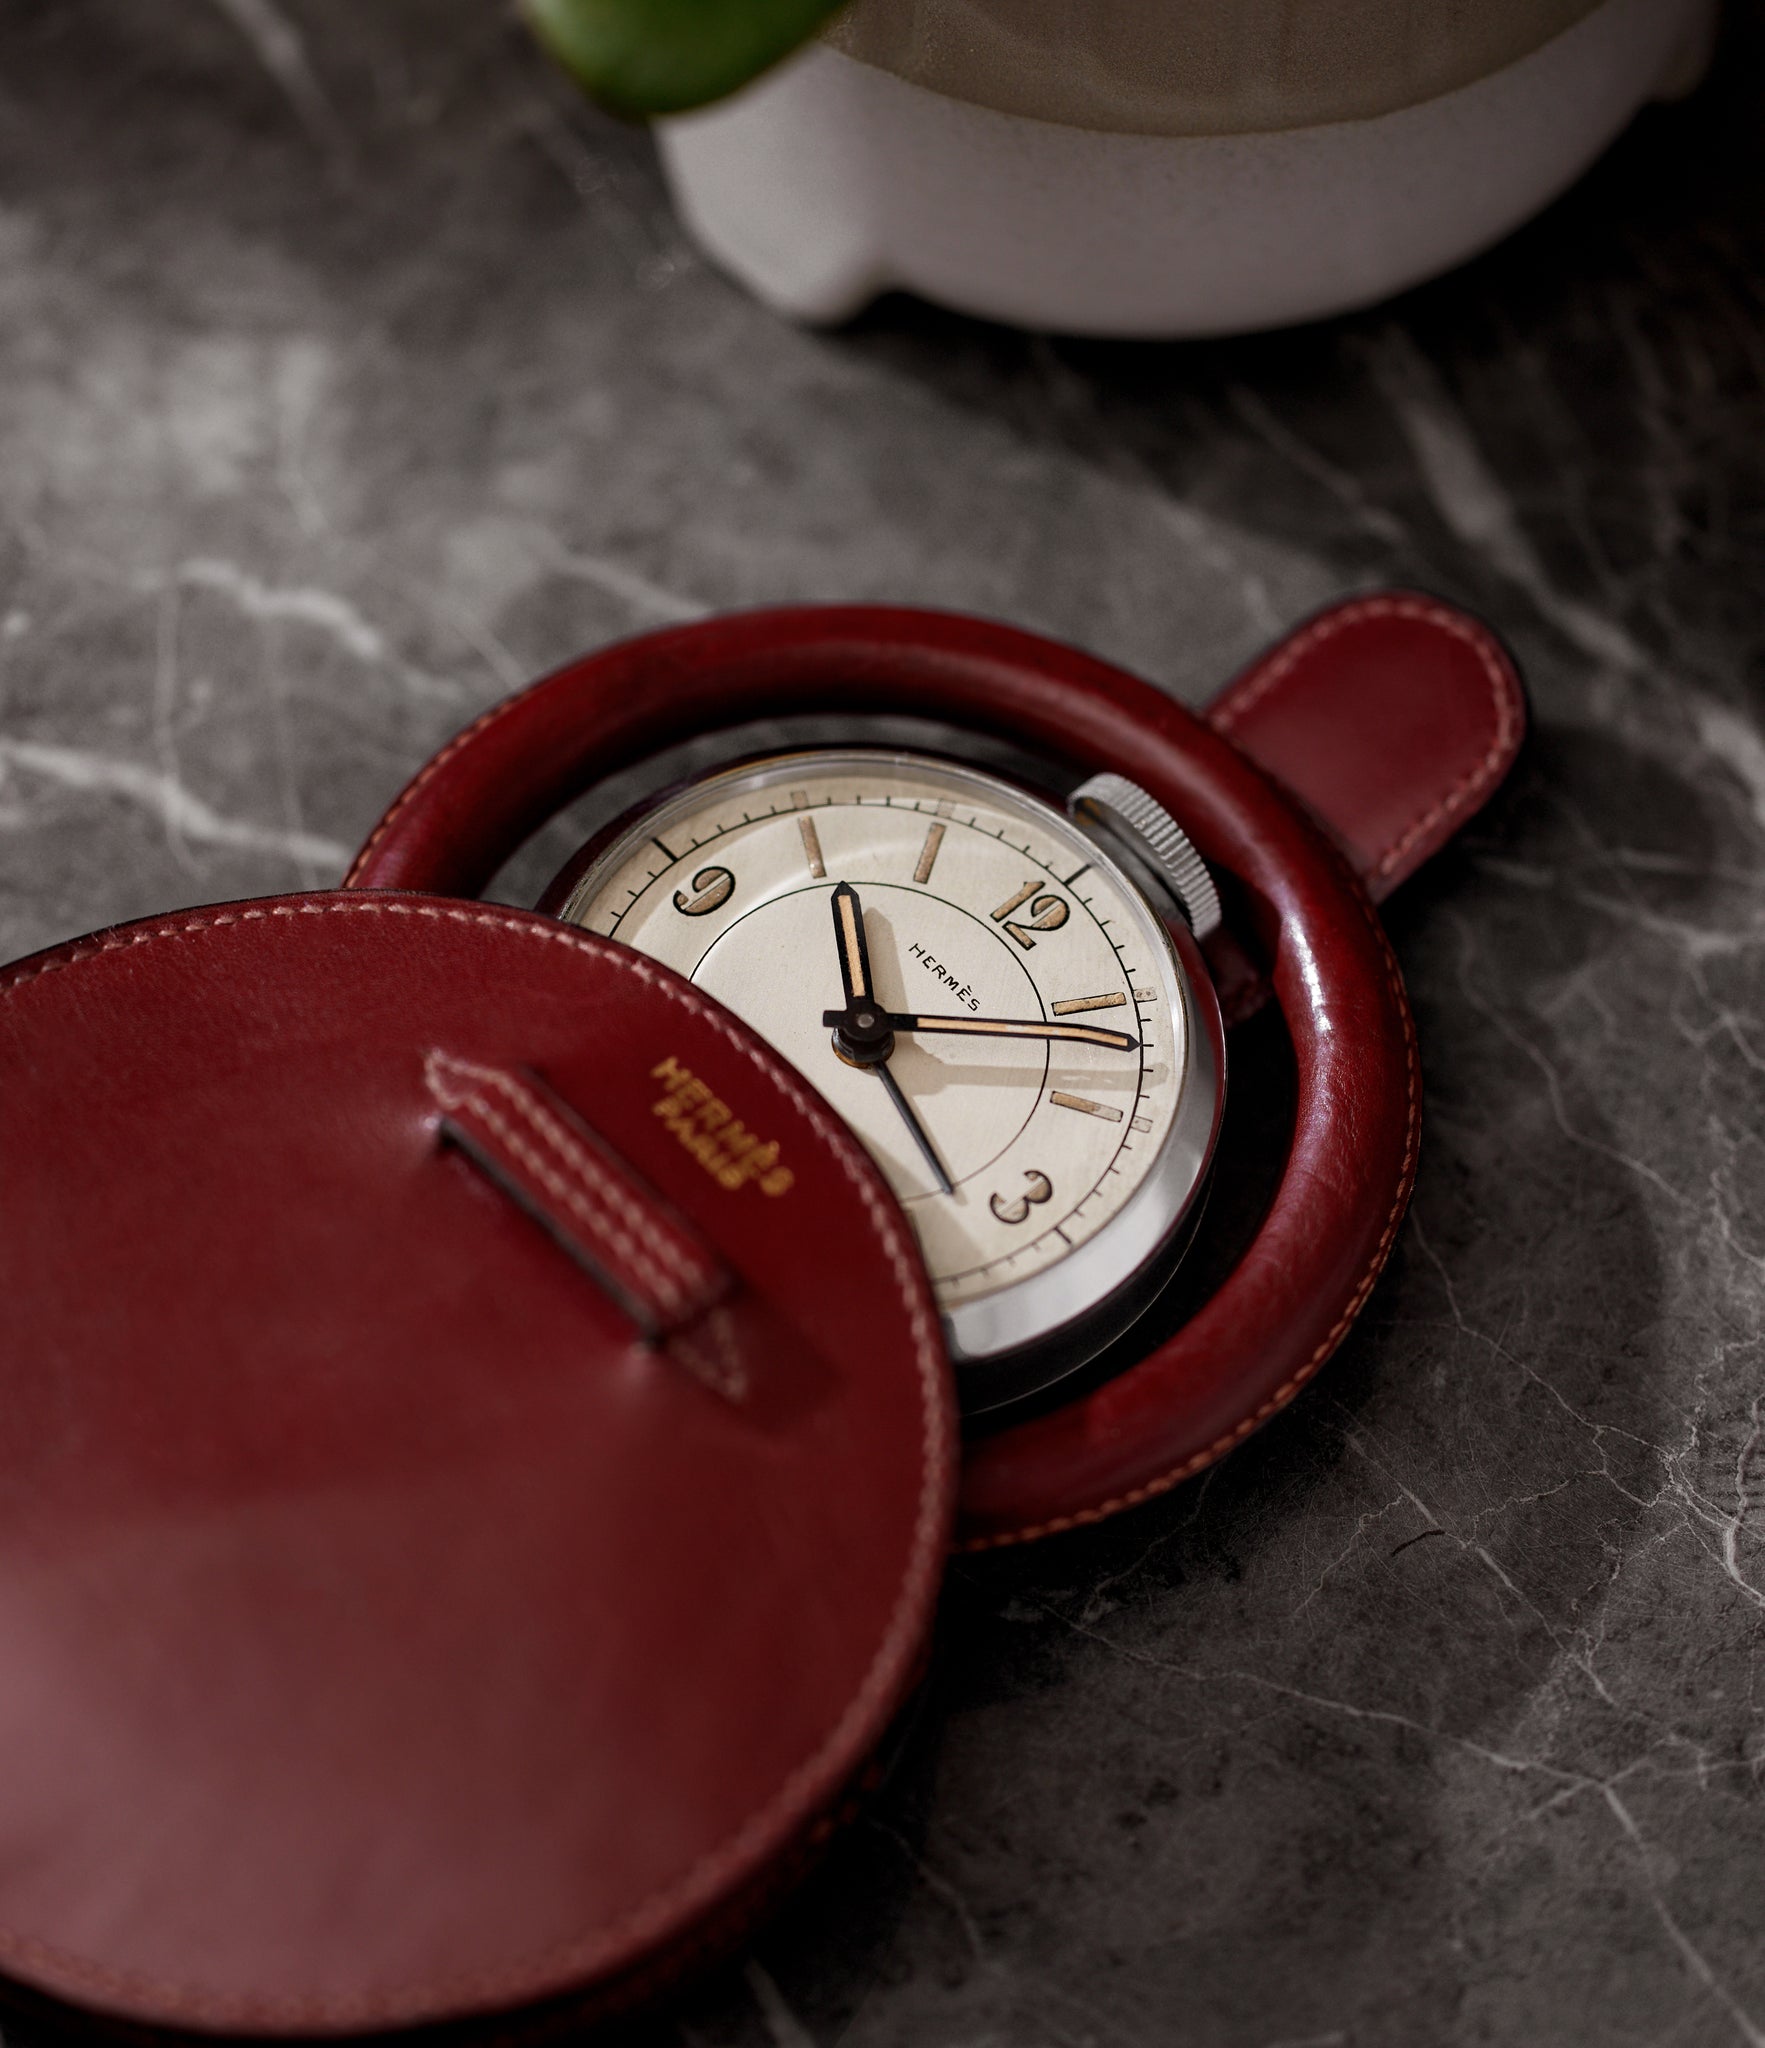 Travel Alarm Clock | “Ring” Style | Stainless Steel & Leather Case | A Collected Man London